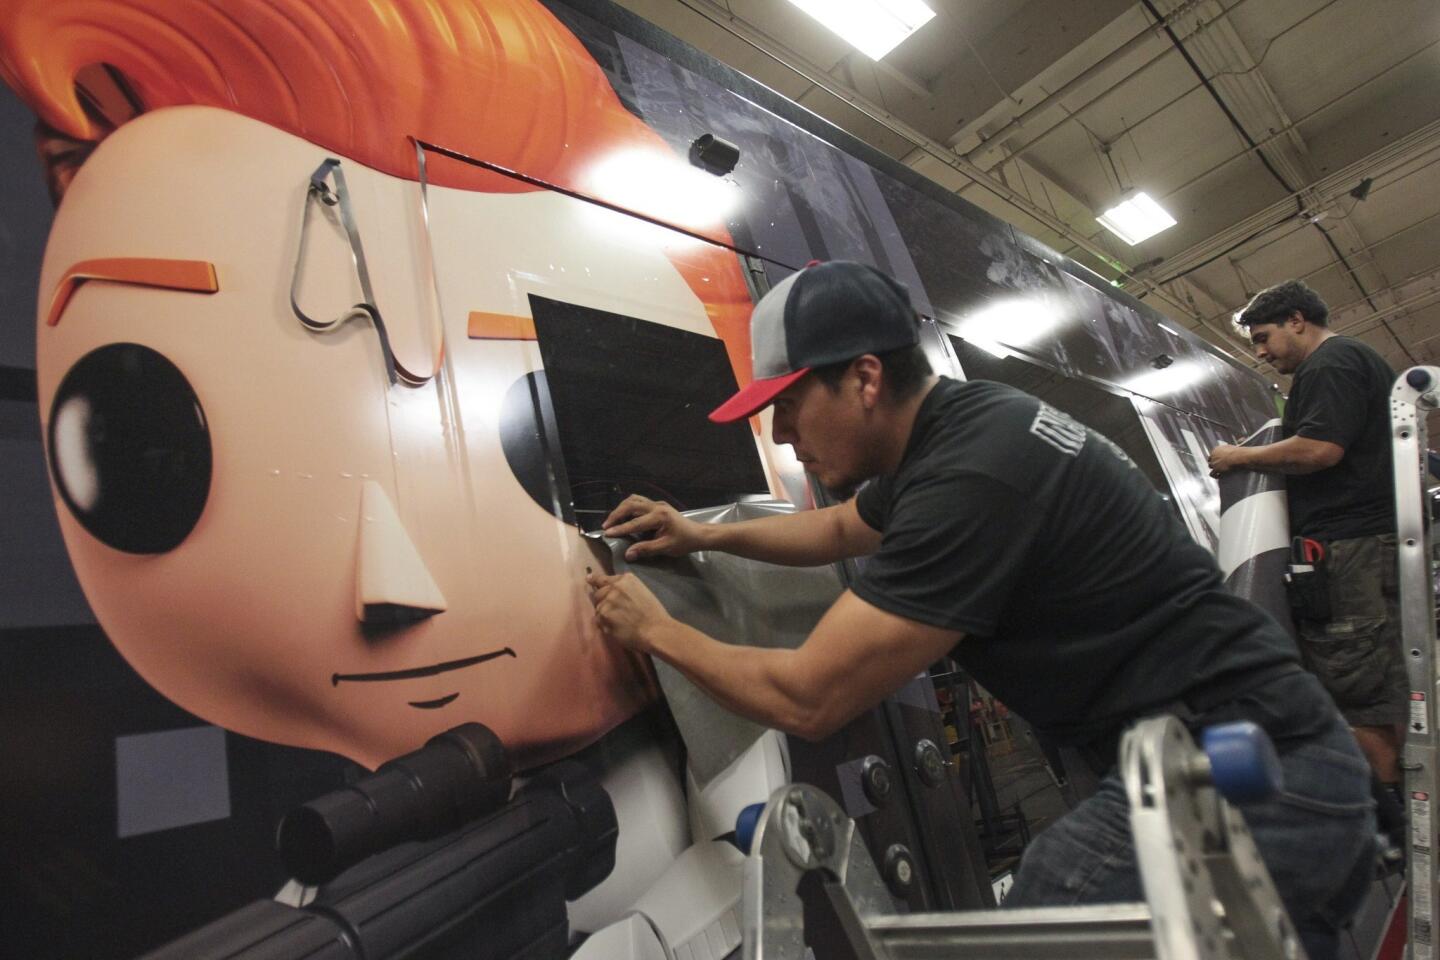 Oscar Santos, left, and David Garcia work on a section of transit vinyl as they and a crew put on an advertising wrap for TBS television host Conan O'Brien's talk show on a trolley car.